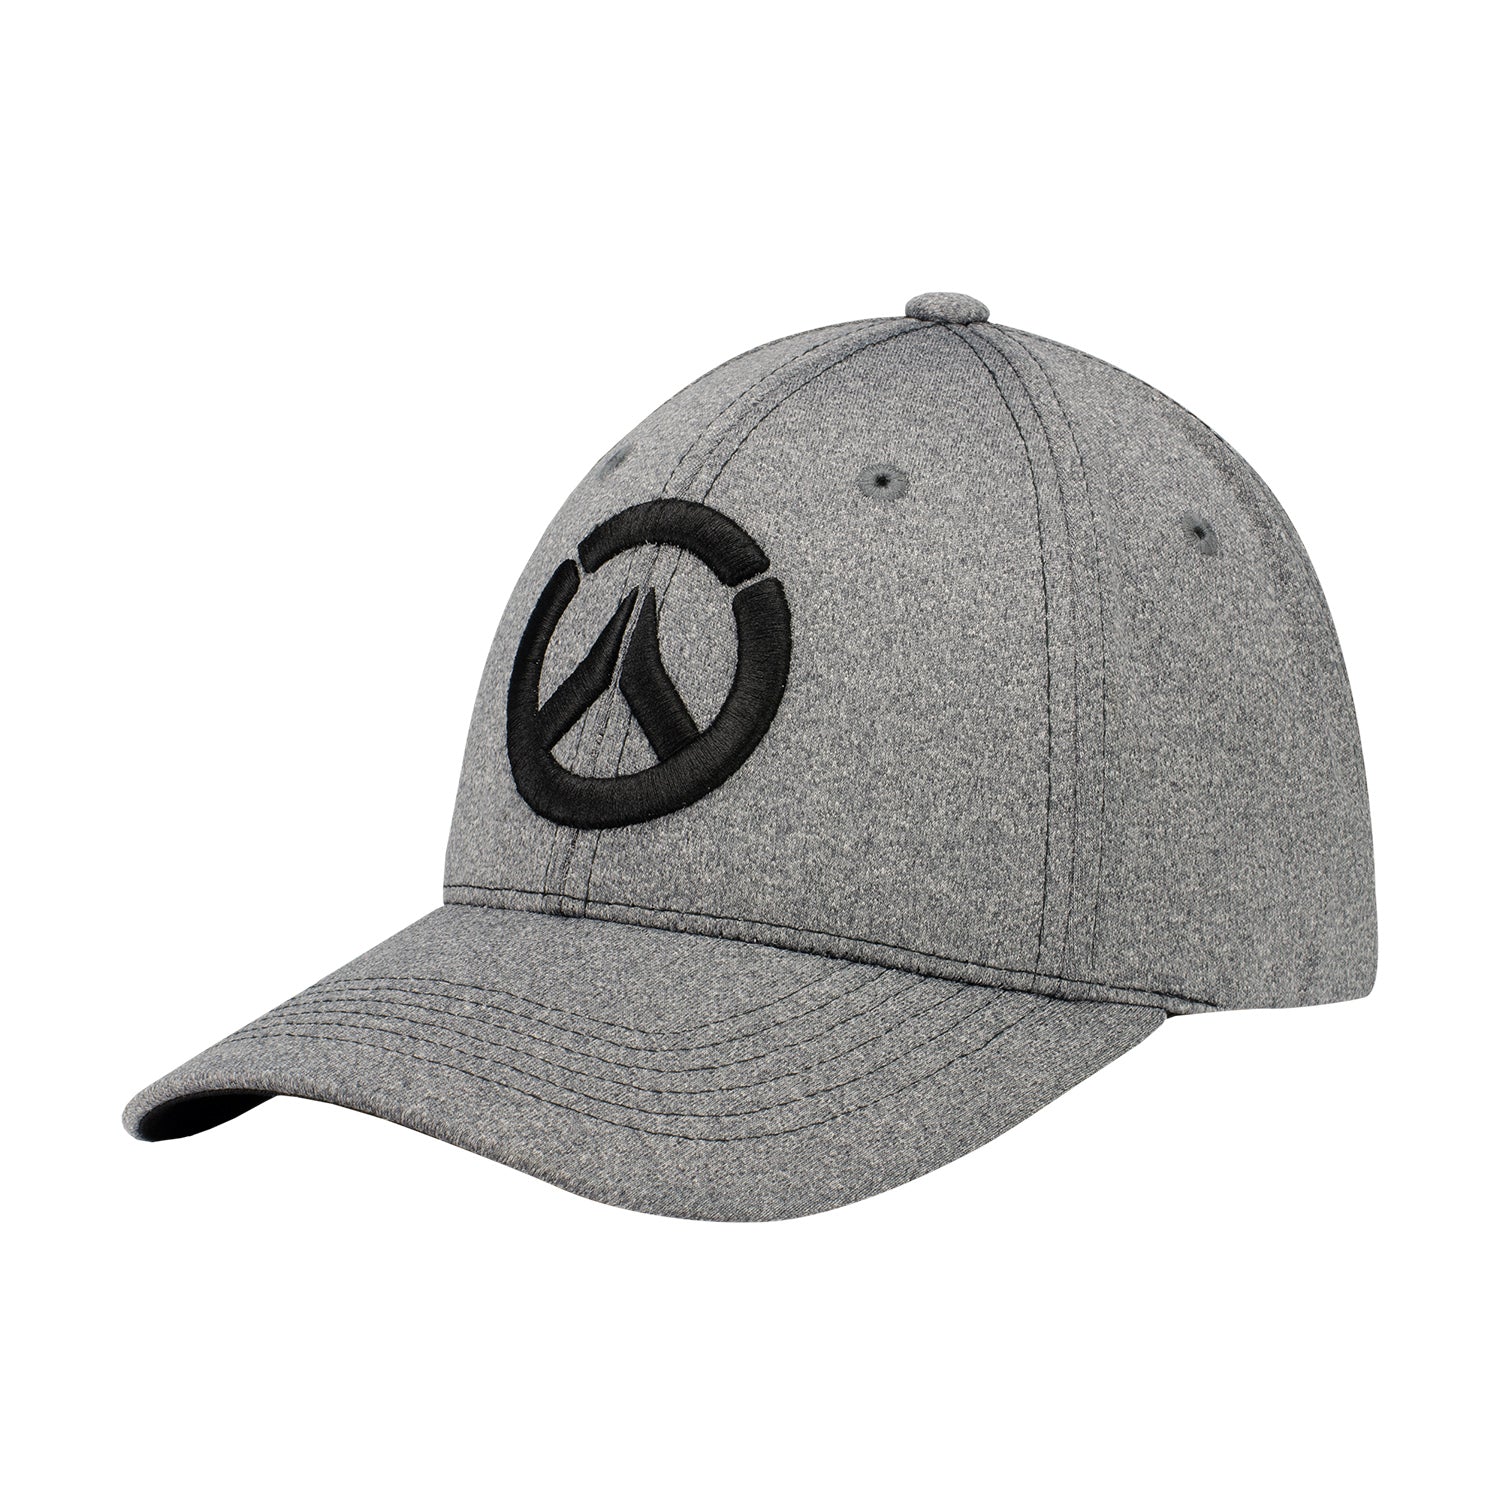 Overwatch Grey Performance Hat - Left Side View with Overwatch Logo on Front